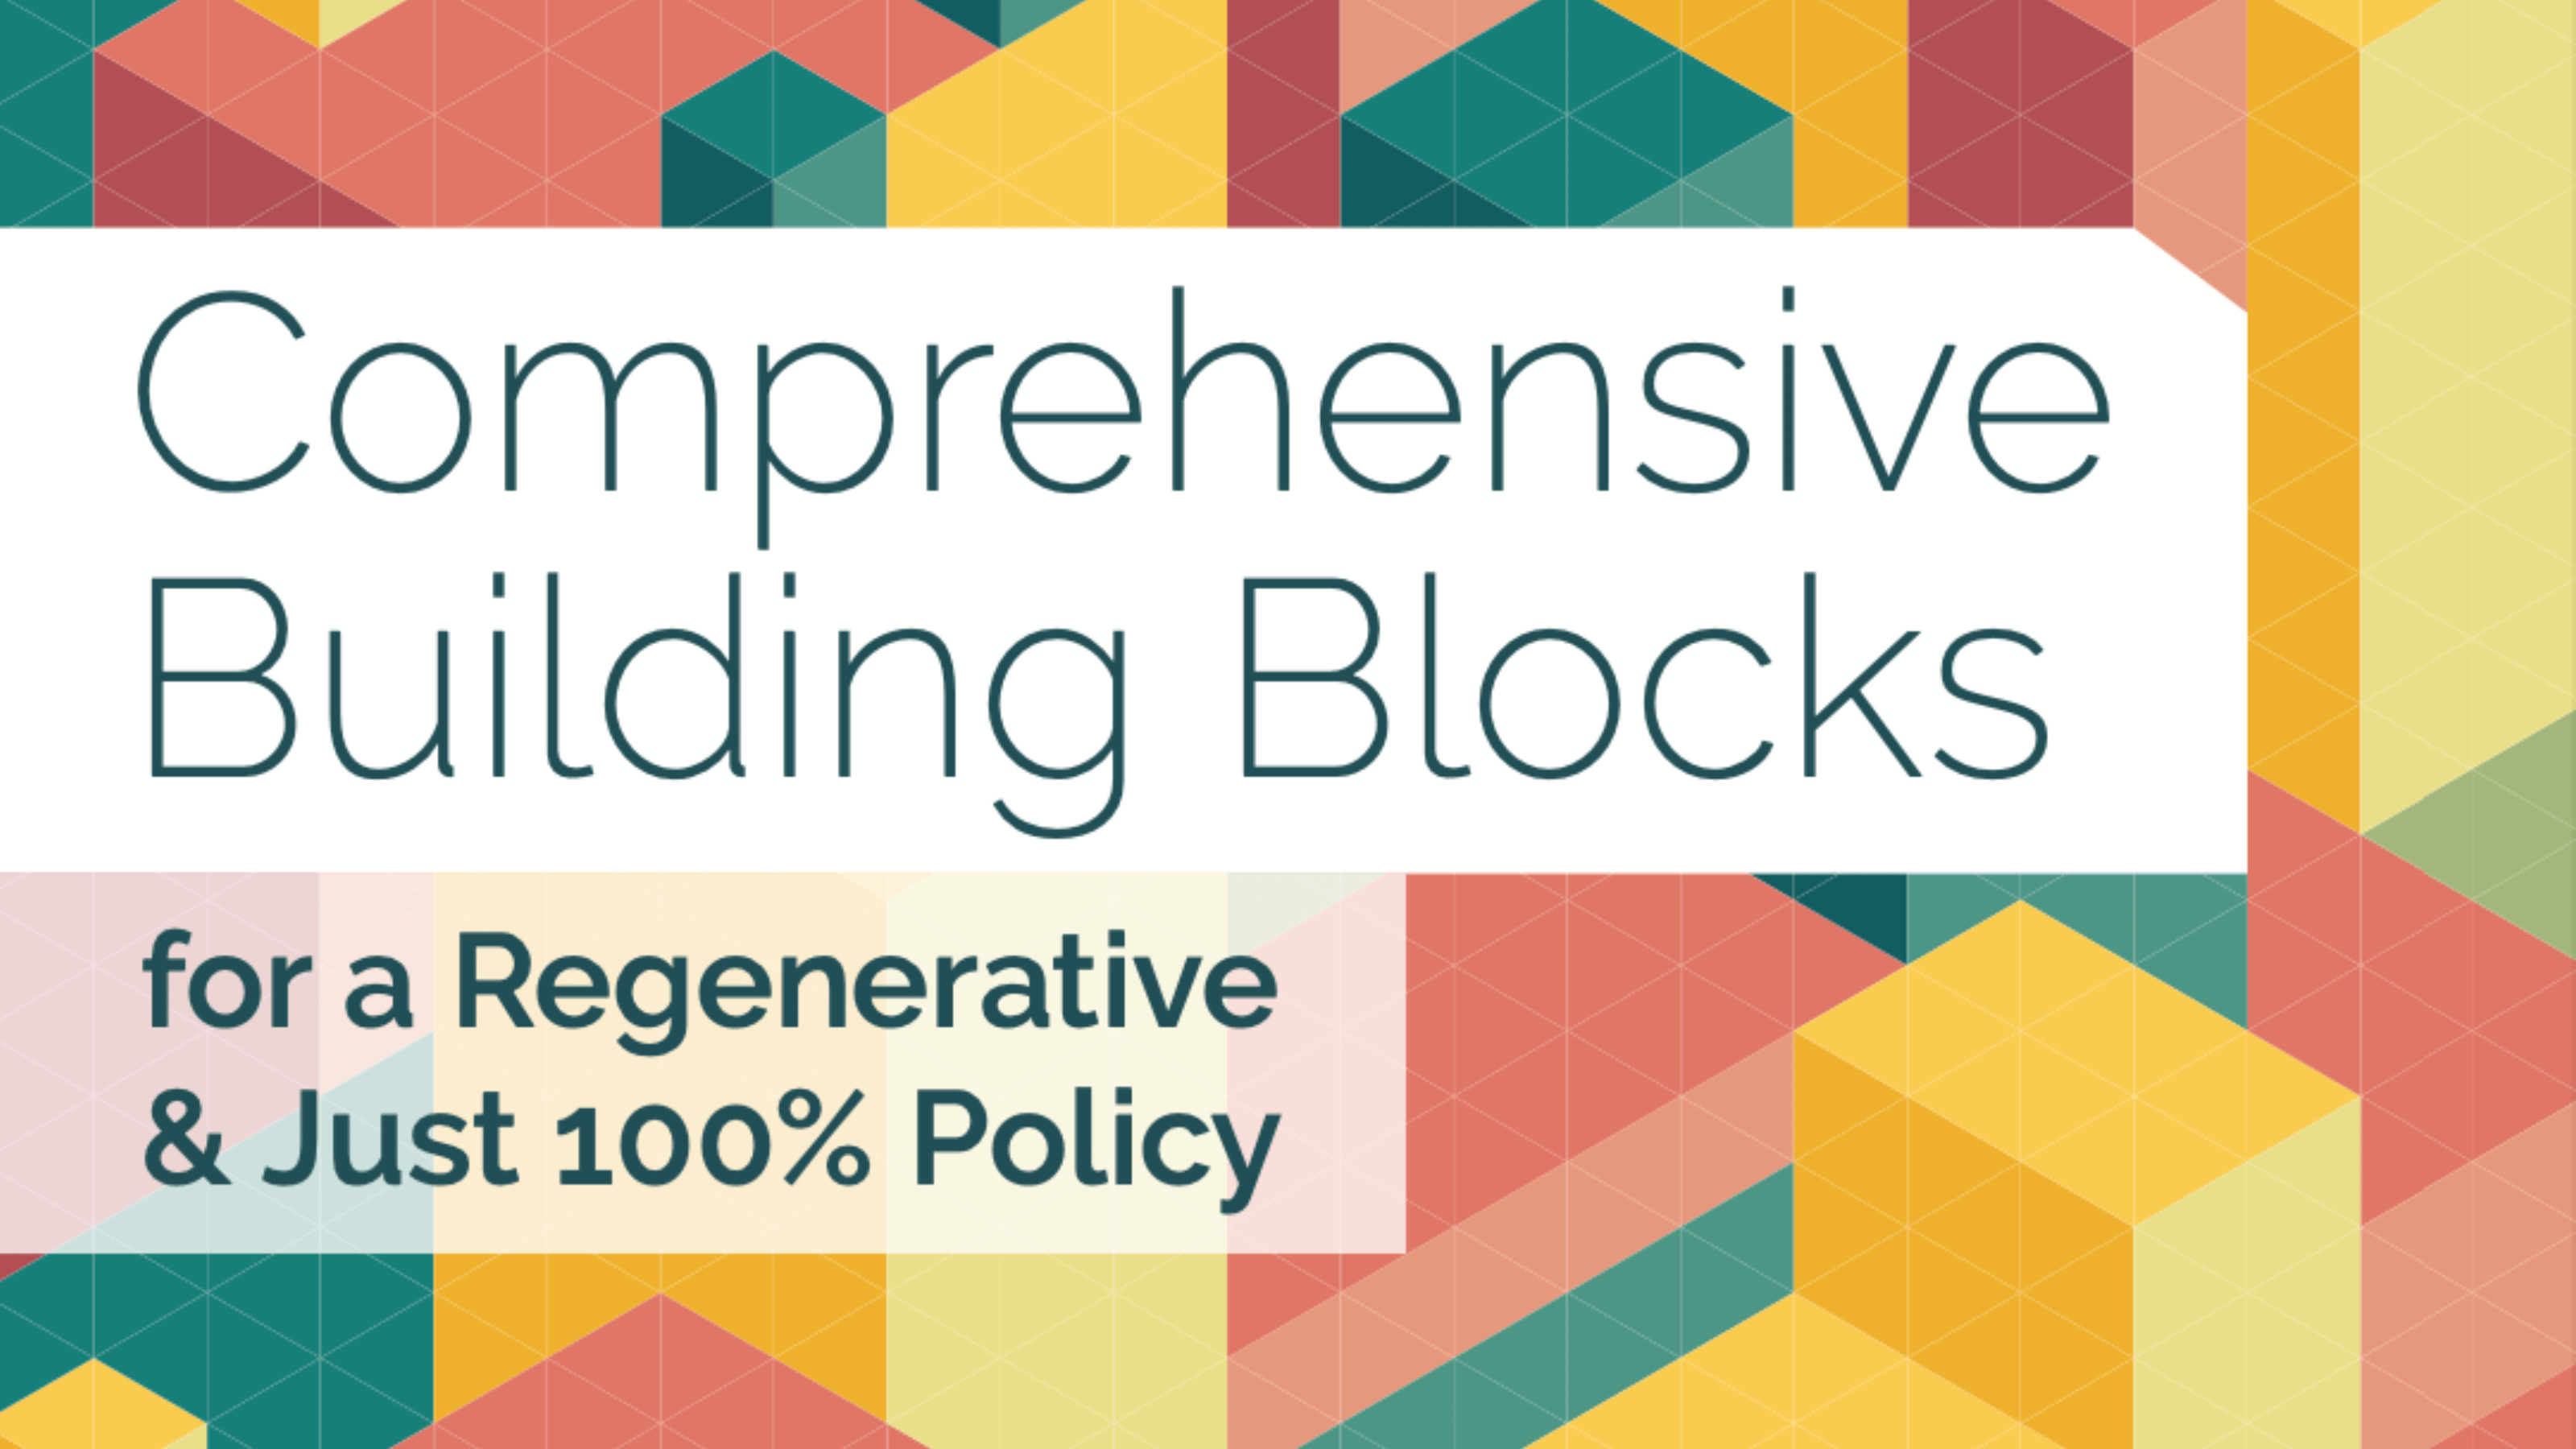 Comprehensive Building Blocks for a Regenerative and Just 100% Policy